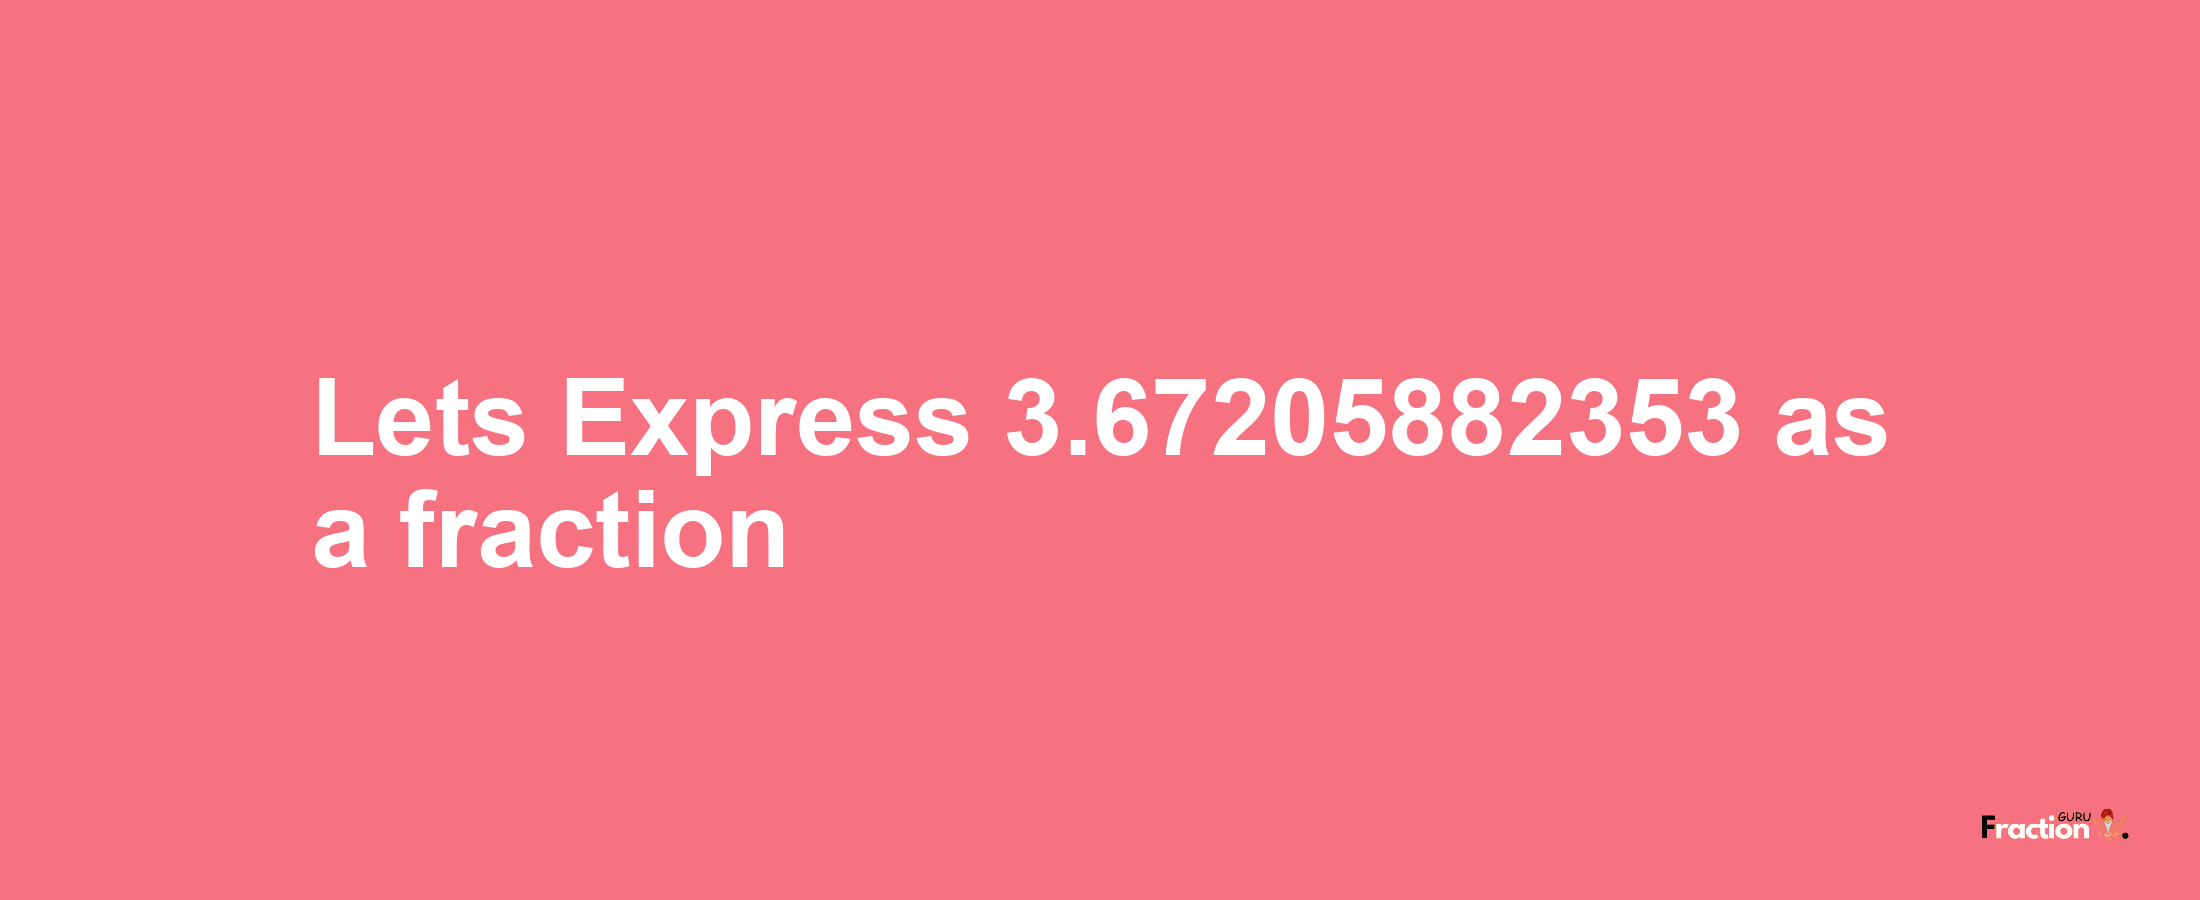 Lets Express 3.67205882353 as afraction